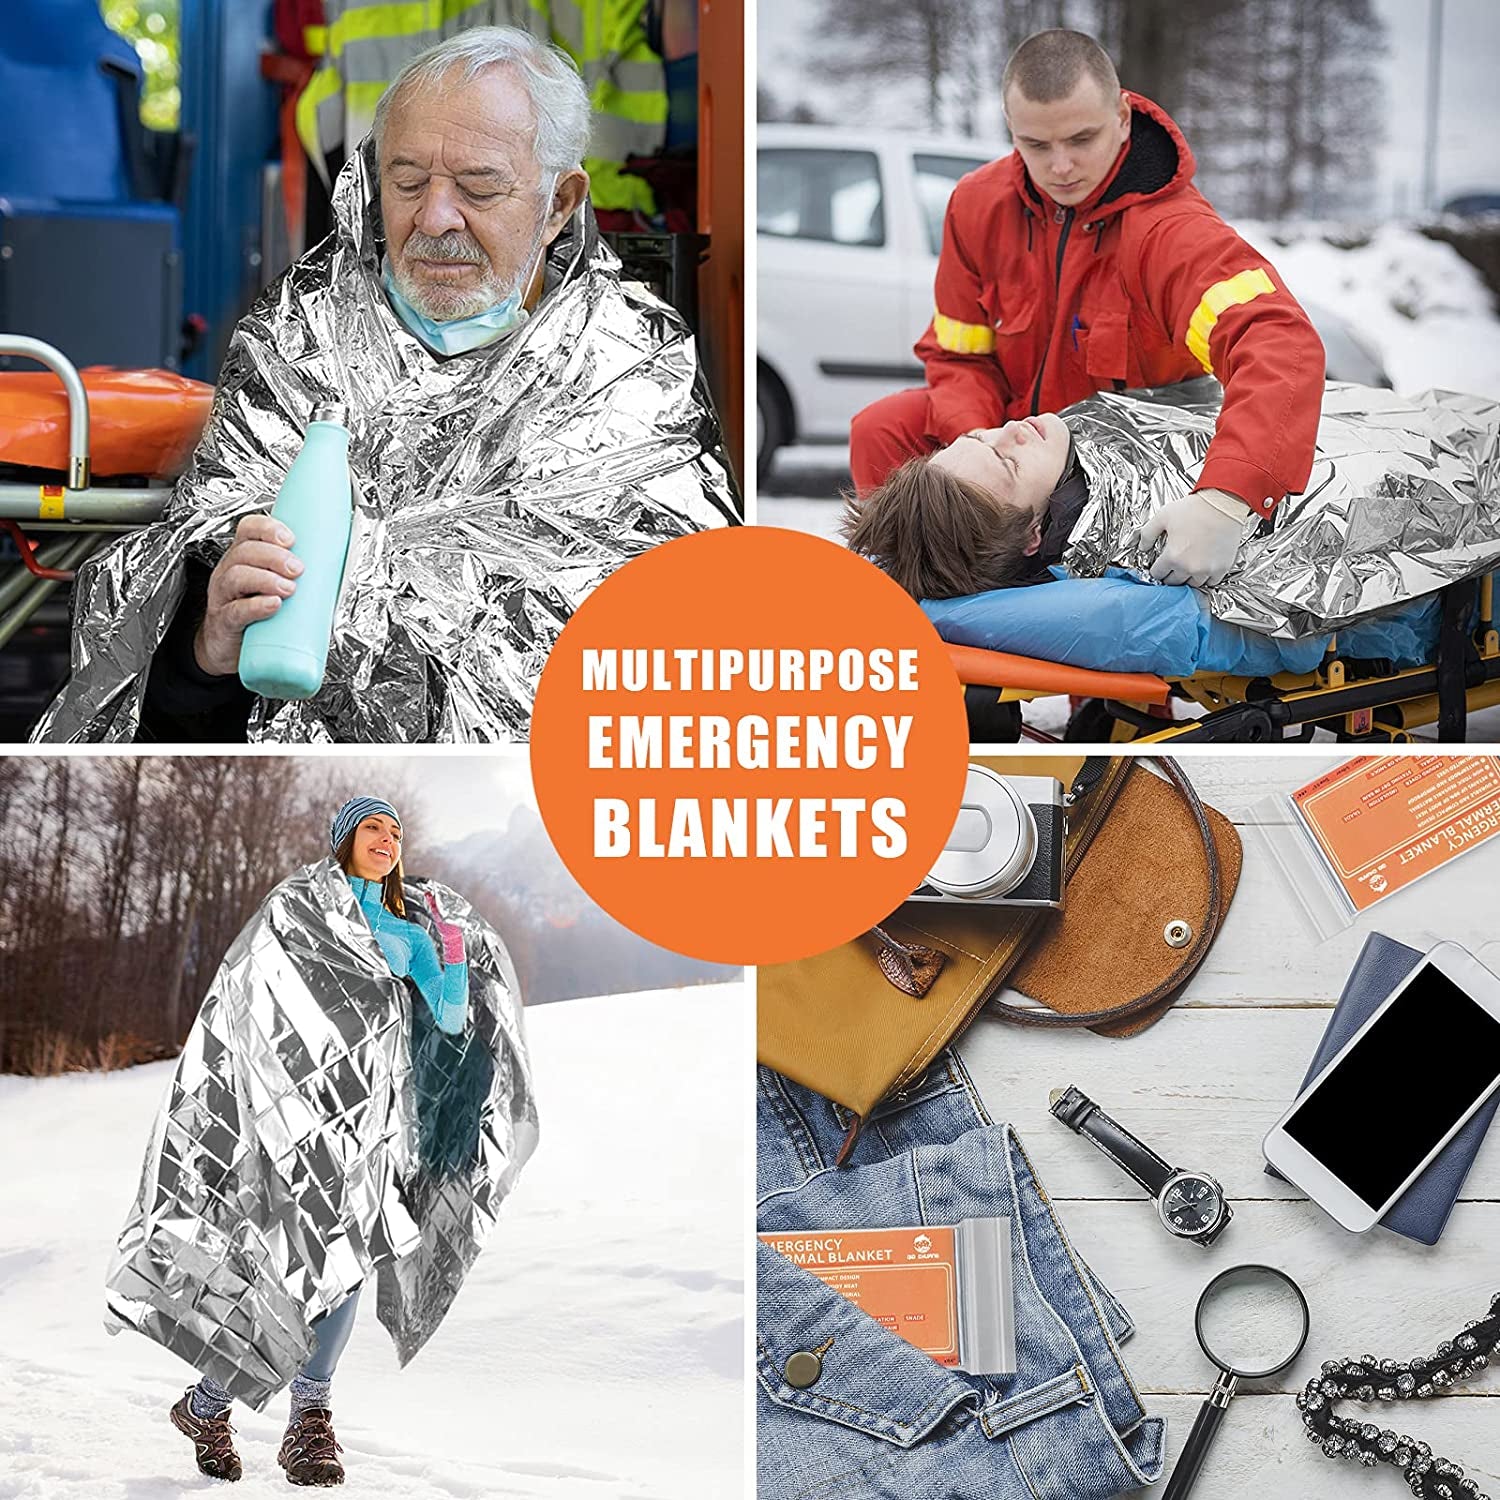 Emergency Mylar Thermal Blankets -Space Blanket Survival Kit Camping Blanket (Pack of 6). Perfect for Outdoors, Hiking, Survival, Bug Out Bag ，Marathons or First Aid